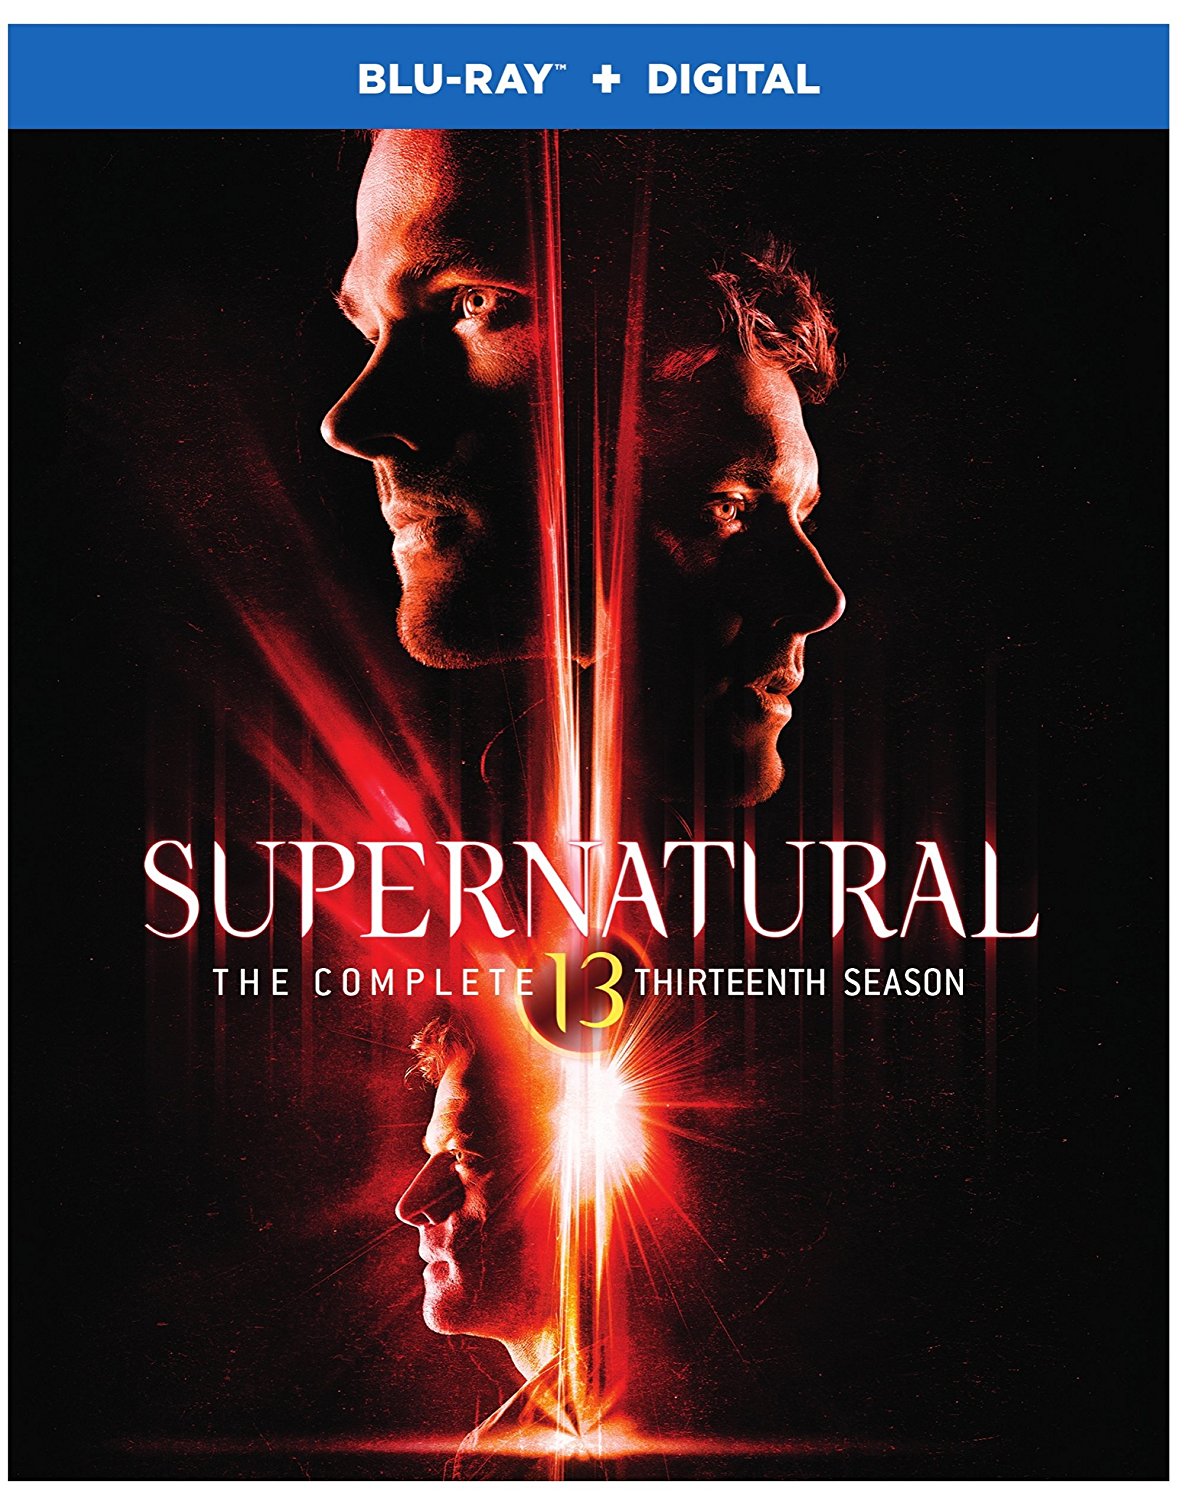 Supernatural: The Complete Thirteenth Season – The Winchester brothers continue on their journey to save the world!